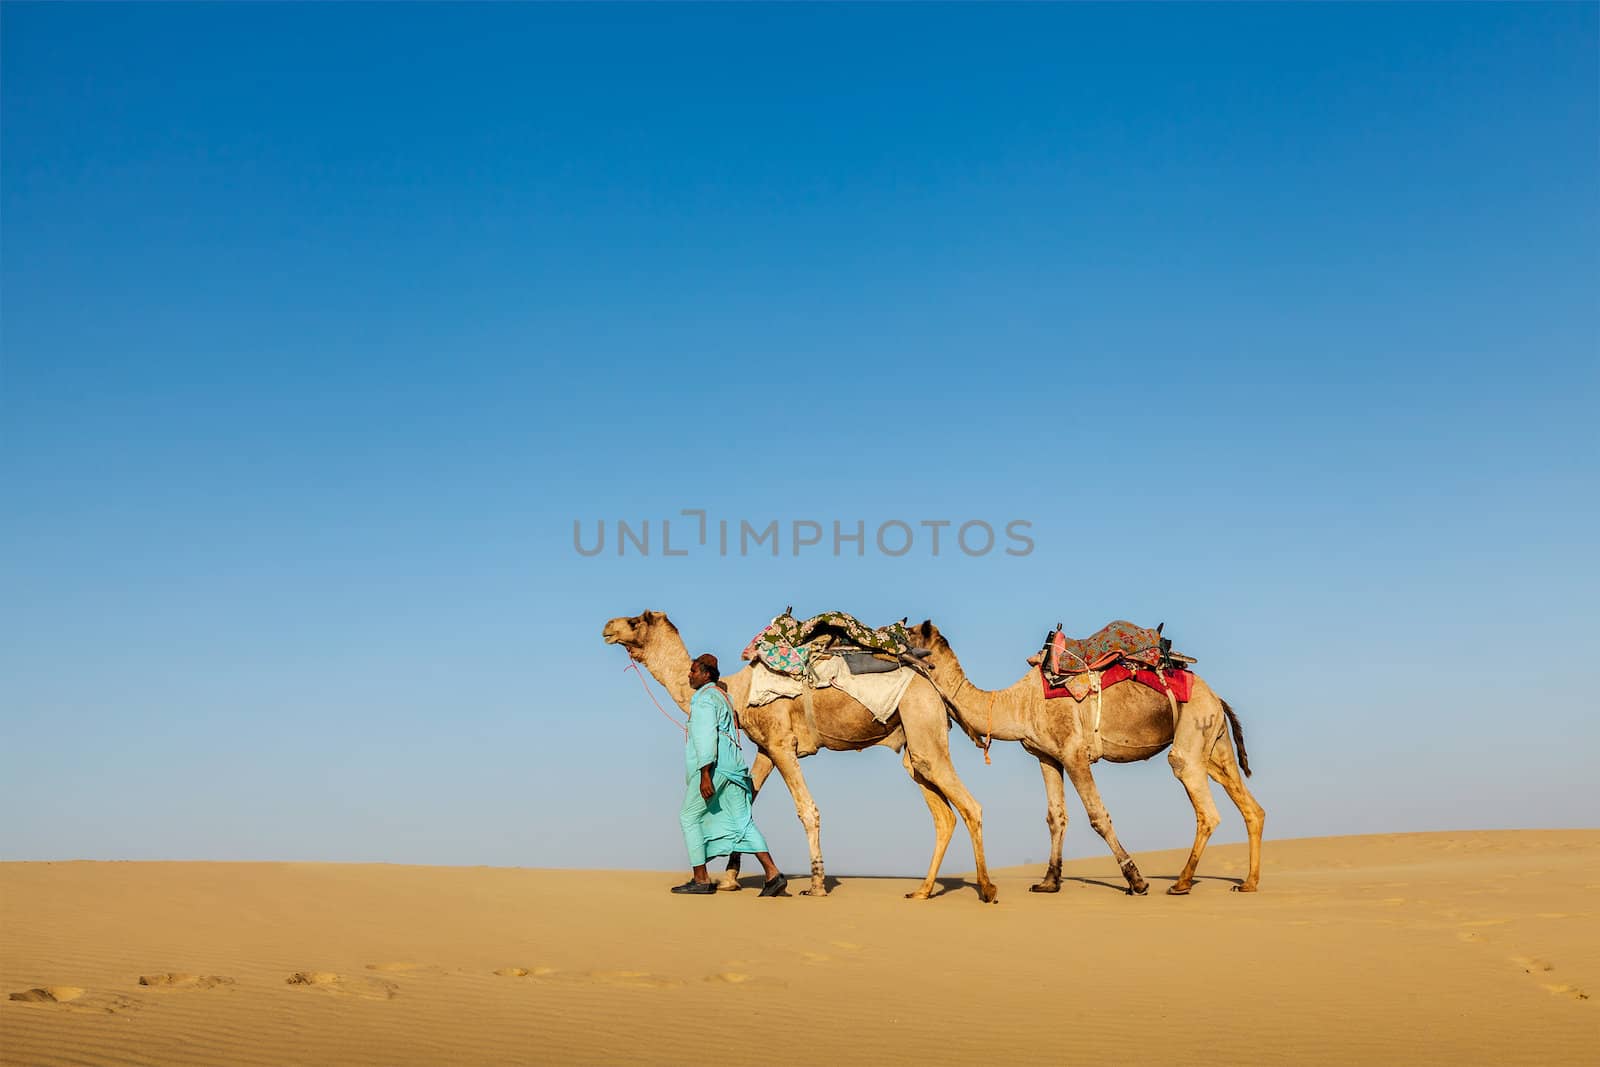 Cameleer (camel driver) with camels in Rajasthan, India by dimol